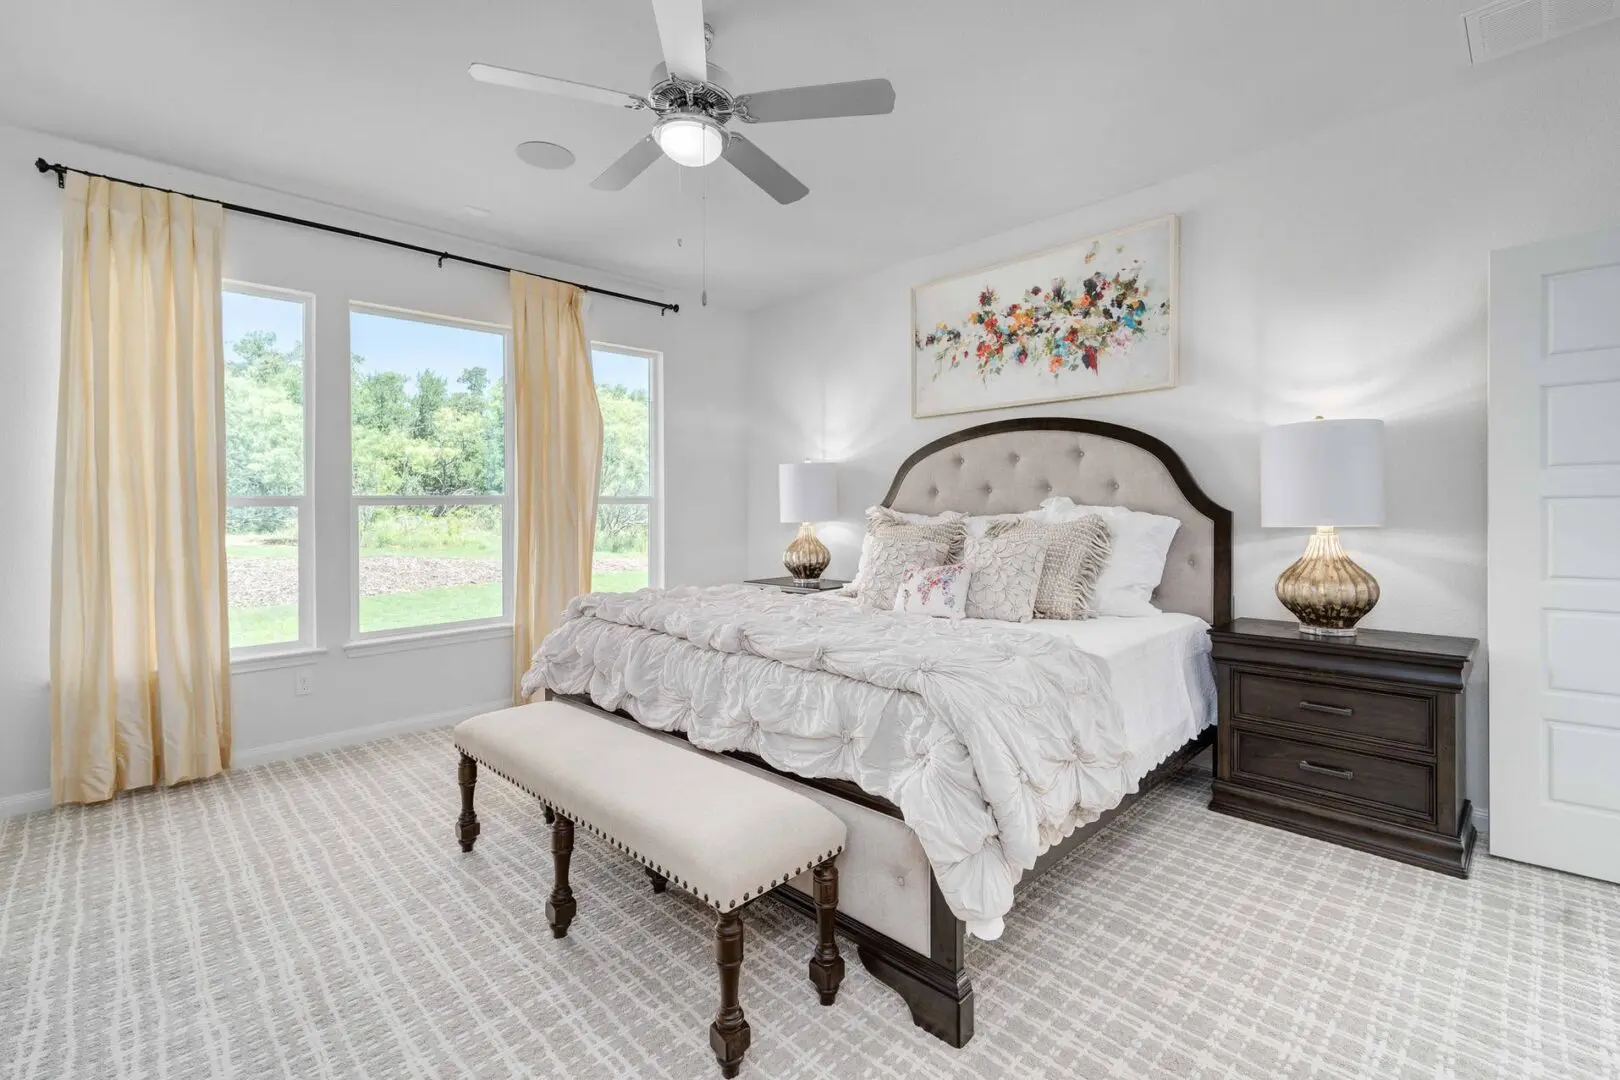 A bedroom with a bed, dresser, and ceiling fan.